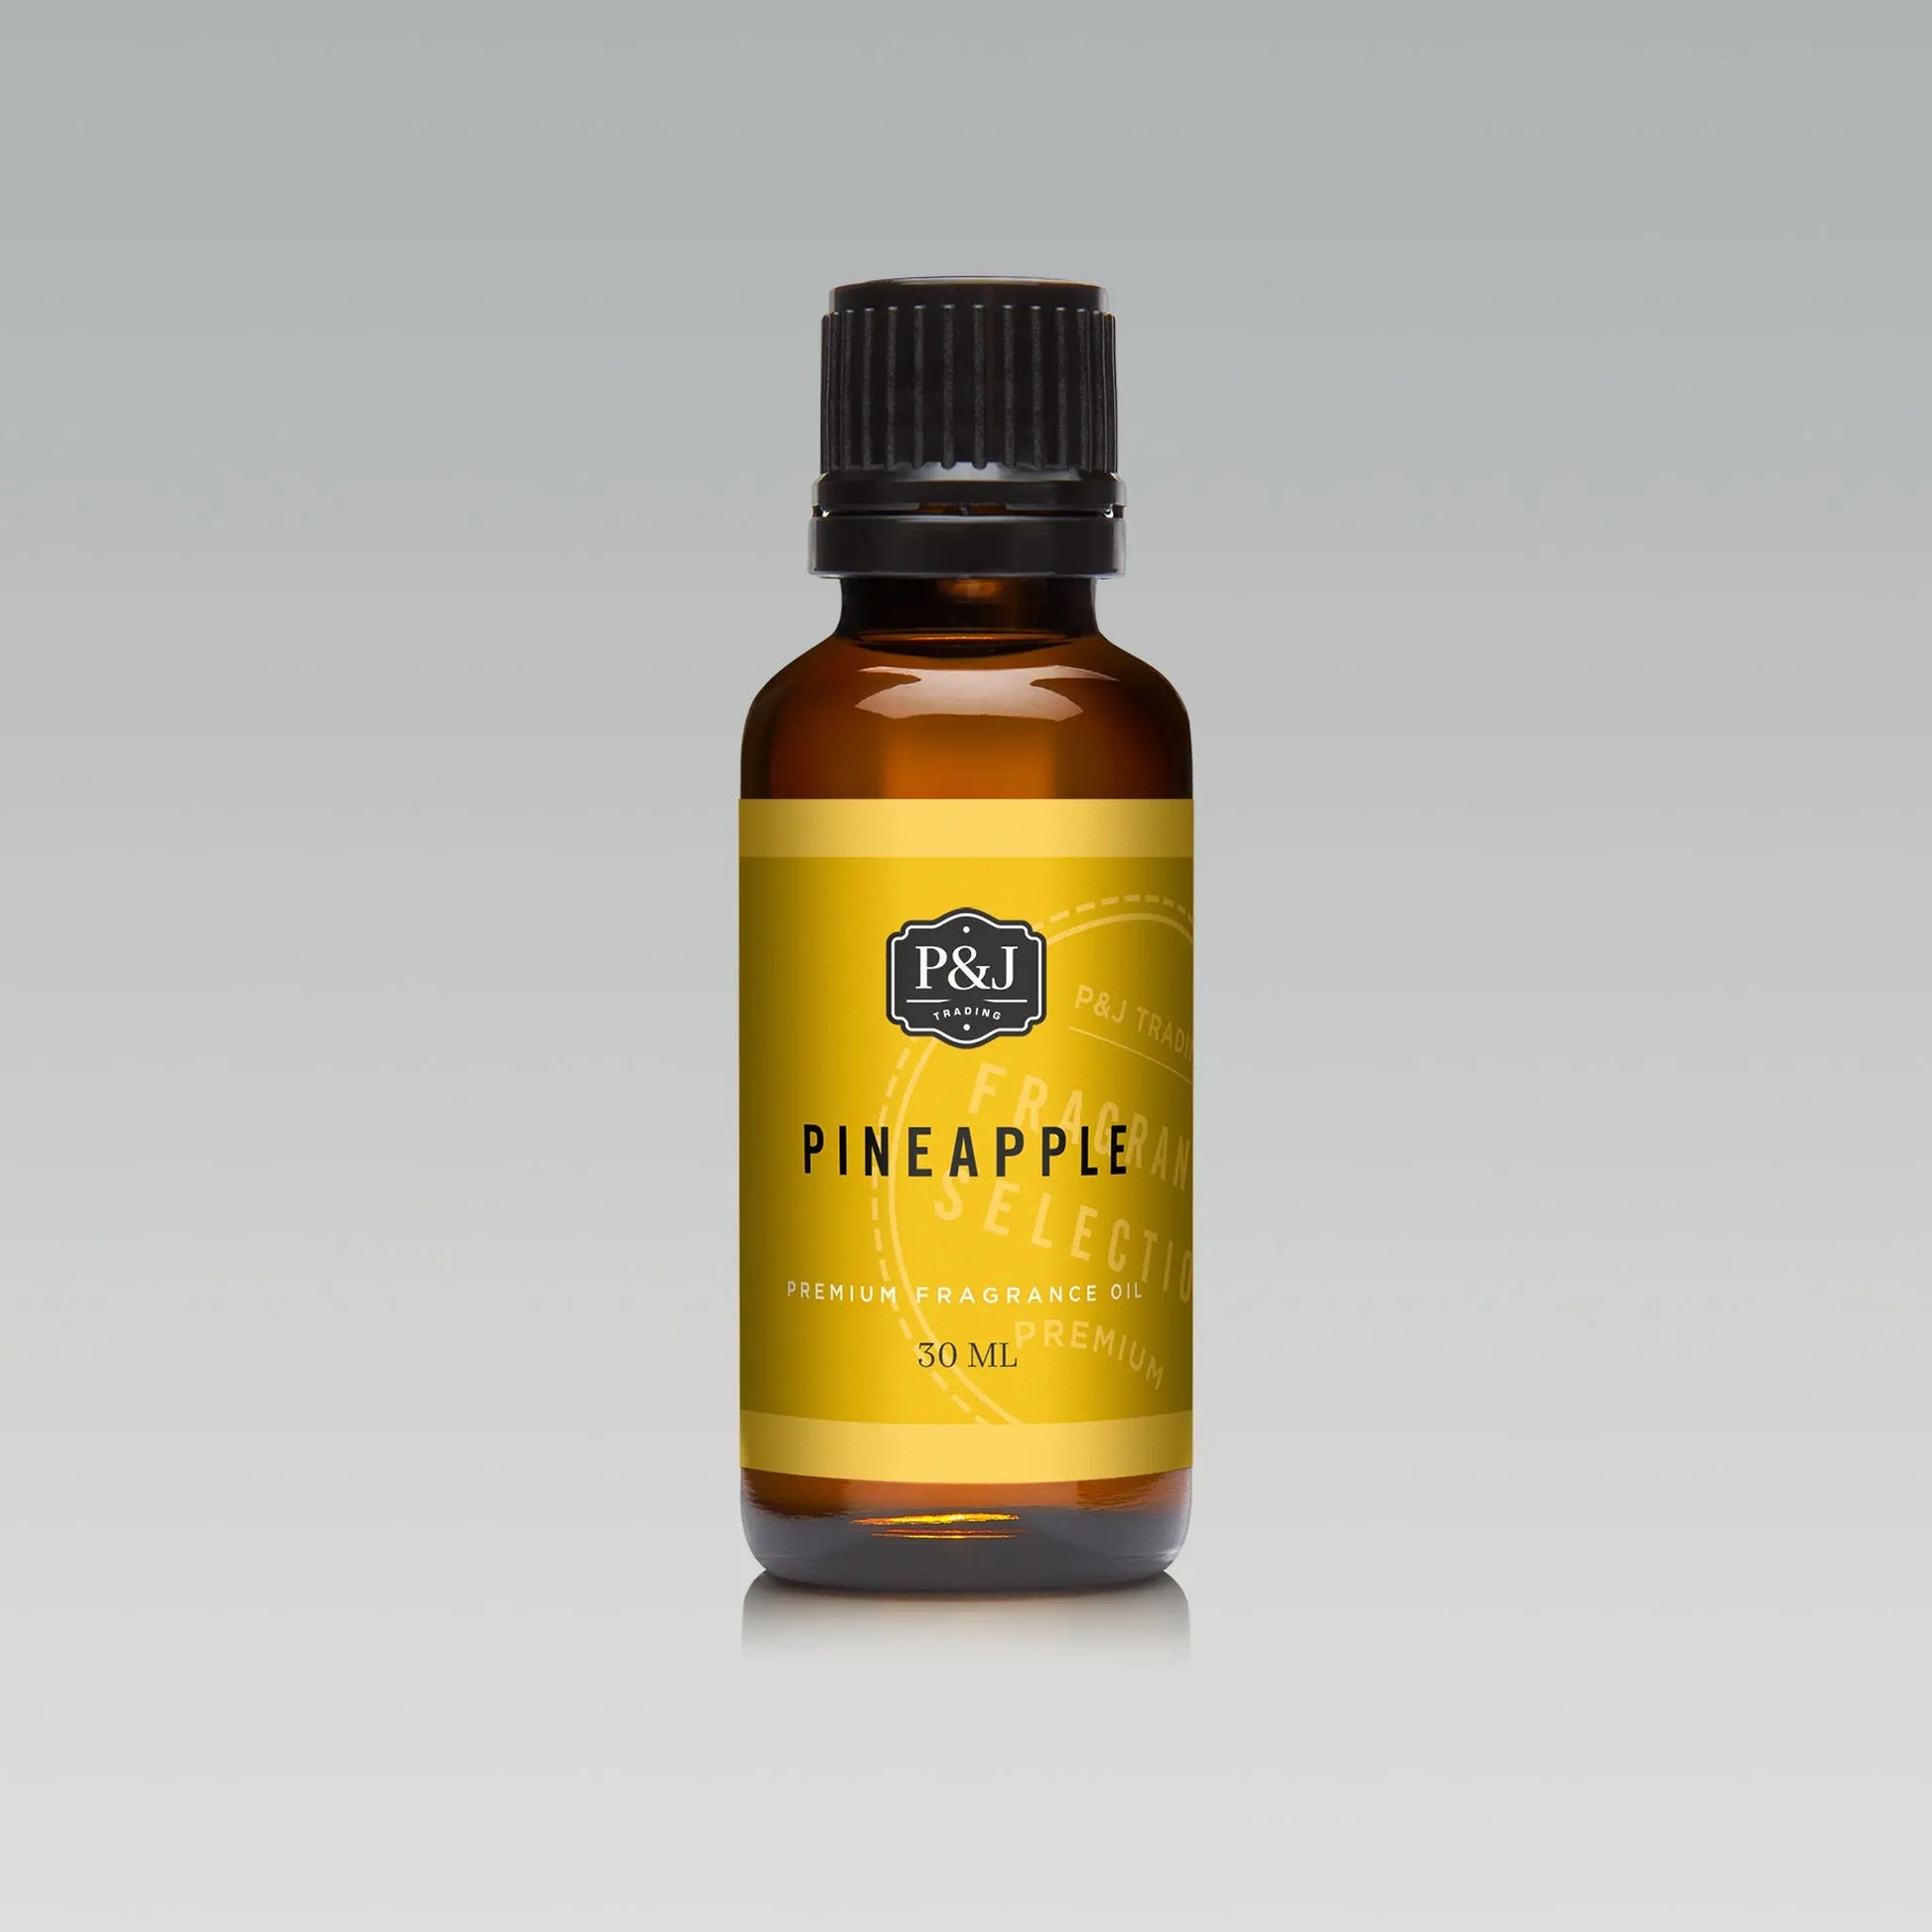 Vanilla Pineapple Blend Premium Grade Fragrance x10 Oil For Candles, Soaps,  Freshies, Body Butters, Incense, Diffuser, Aromatherapy 10 ml.